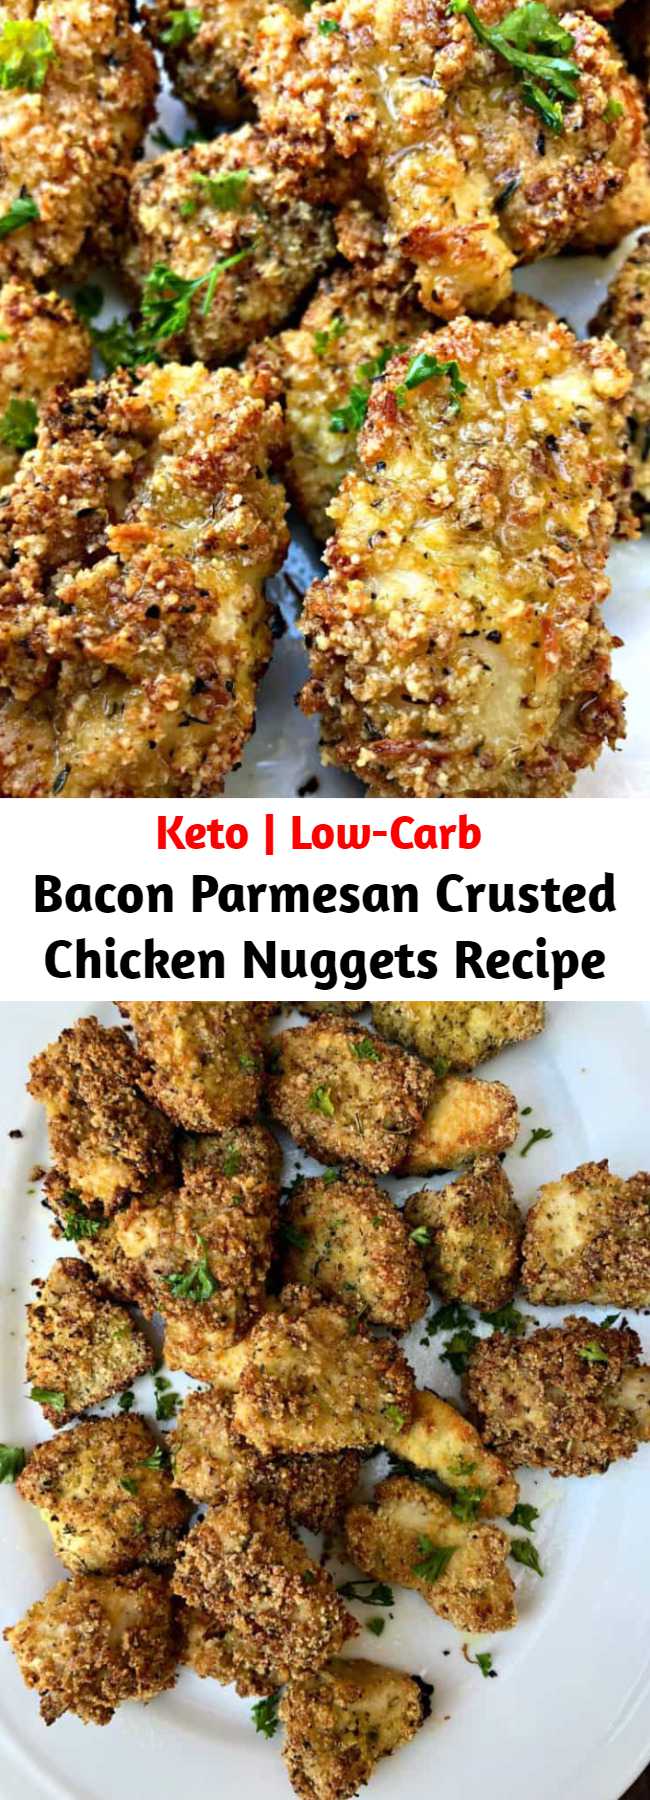 Bacon Parmesan Crusted Chicken Nuggets Recipe - Keto Low-Carb Bacon Parmesan Crusted Chicken Nuggets with Avocado Ranch dipping sauce is a quick and easy recipe perfect for tenders, strips, or chicken fingers. This dish is ketogenic, great for ketosis, family, and kid-friendly with only 3 grams of carbs per serving! Serve them baked or fried. #KetoRecipes #KetoDiet #KetoChickenNuggets